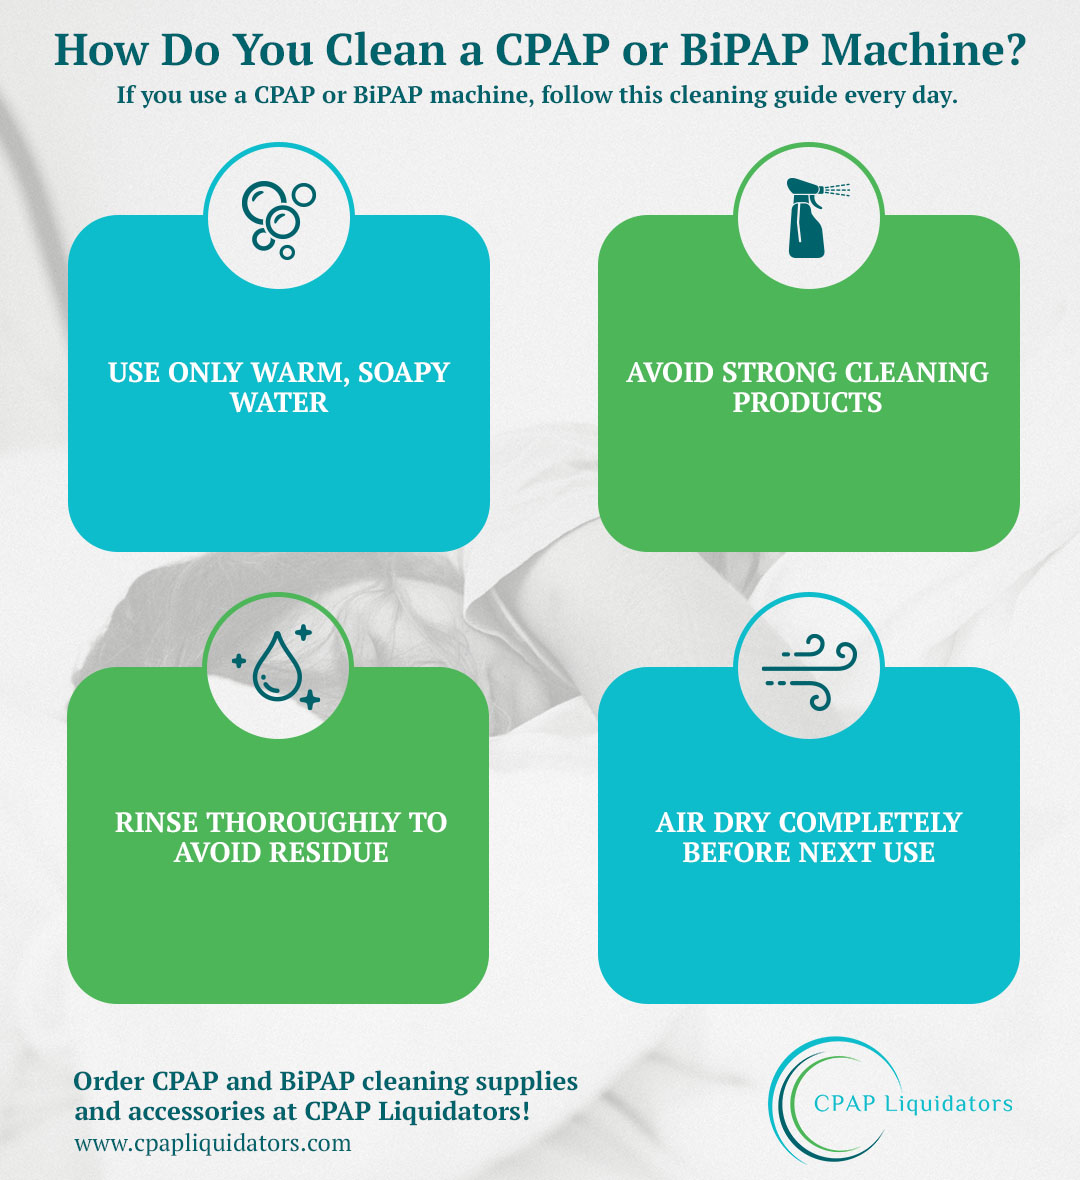 how-do-you-clean-a-cpap-infographic.jpg